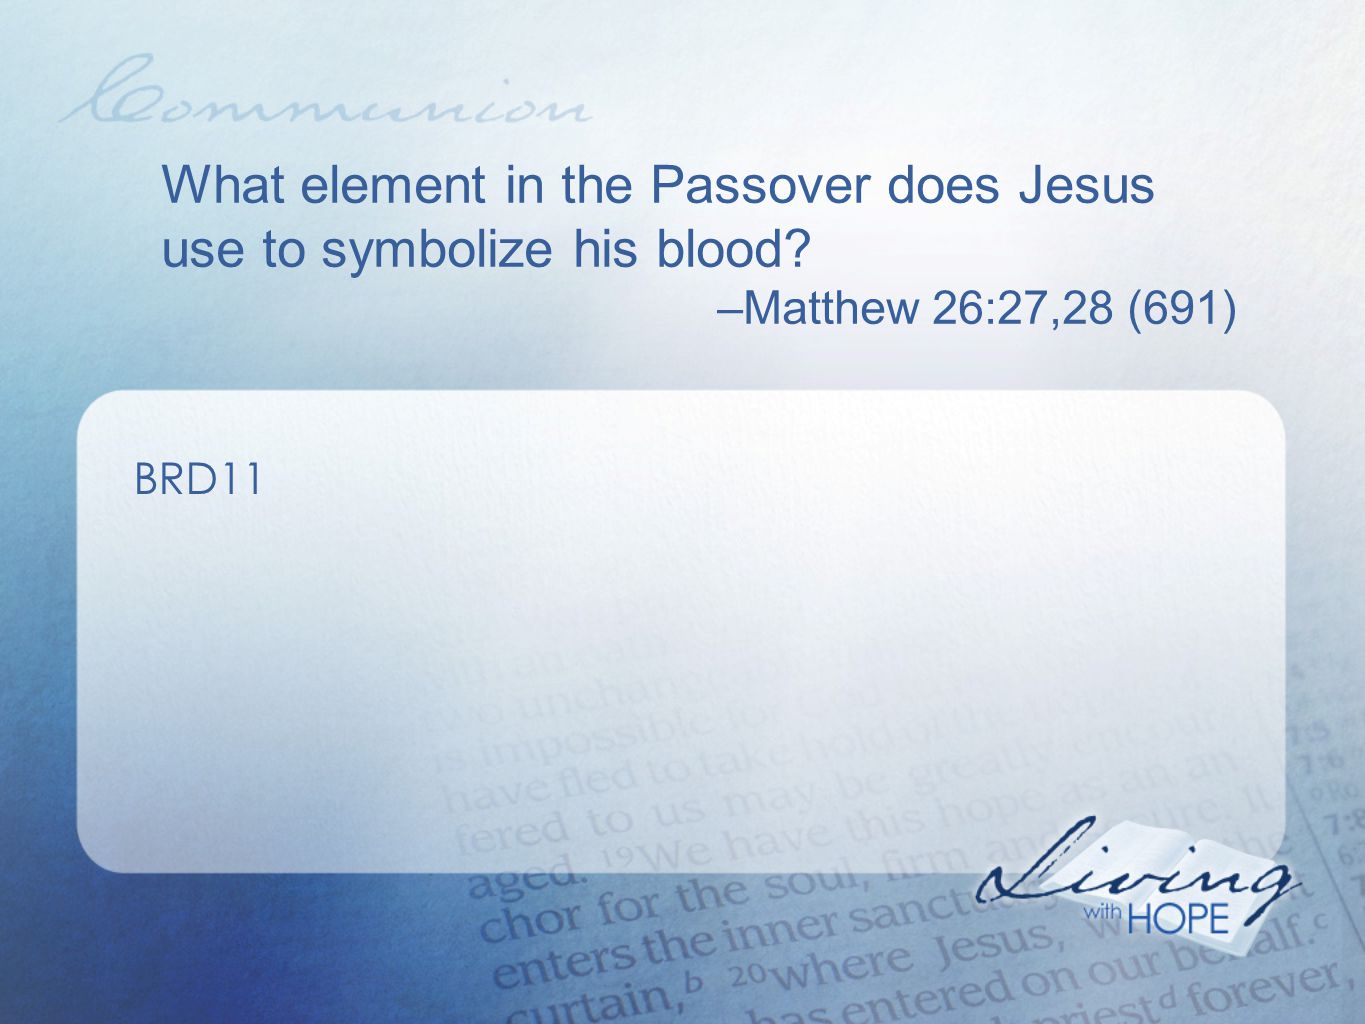 What element in the Passover does Jesus use to symbolize his blood